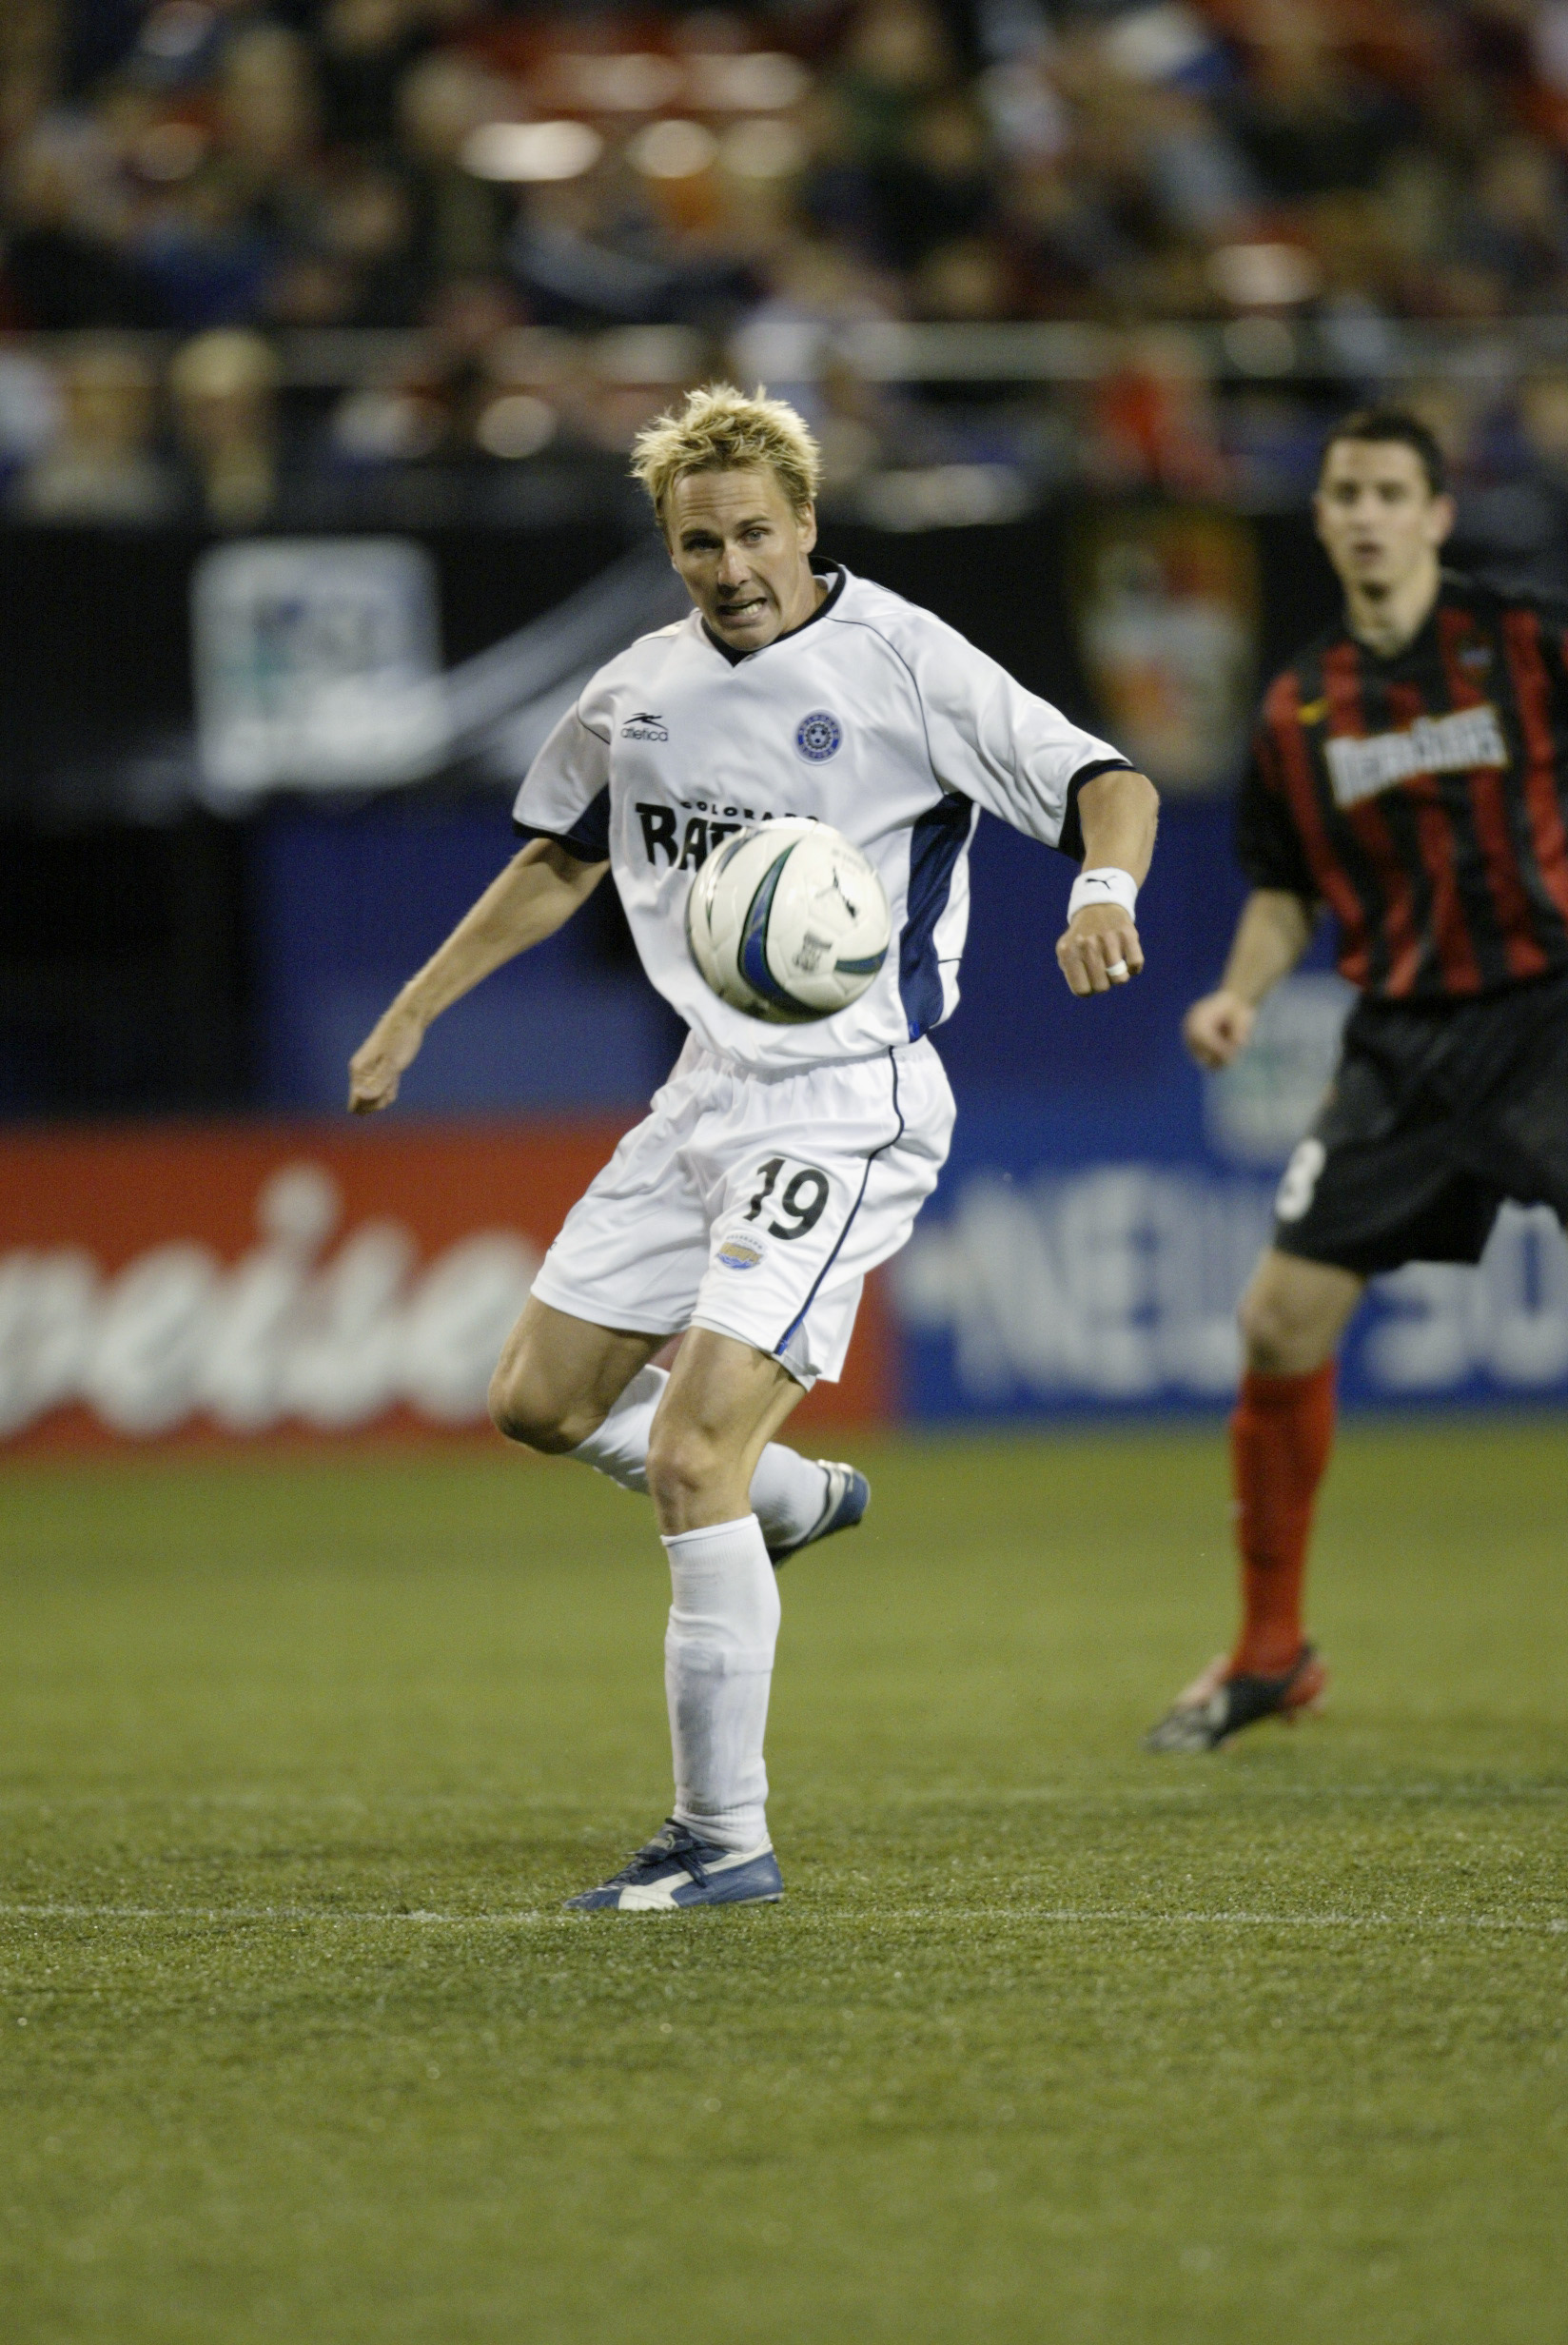 EAST RUTHERFORD, NJ - MAY 3:  Midfielder Chris Henderson #19 of the Colorado Rapids attempts to volley the ball during the MLS game against the New York-New Jersey MetroStars at Giants Stadium on May 3, 2003 in East Rutherford, New Jersey. The MetroStars 